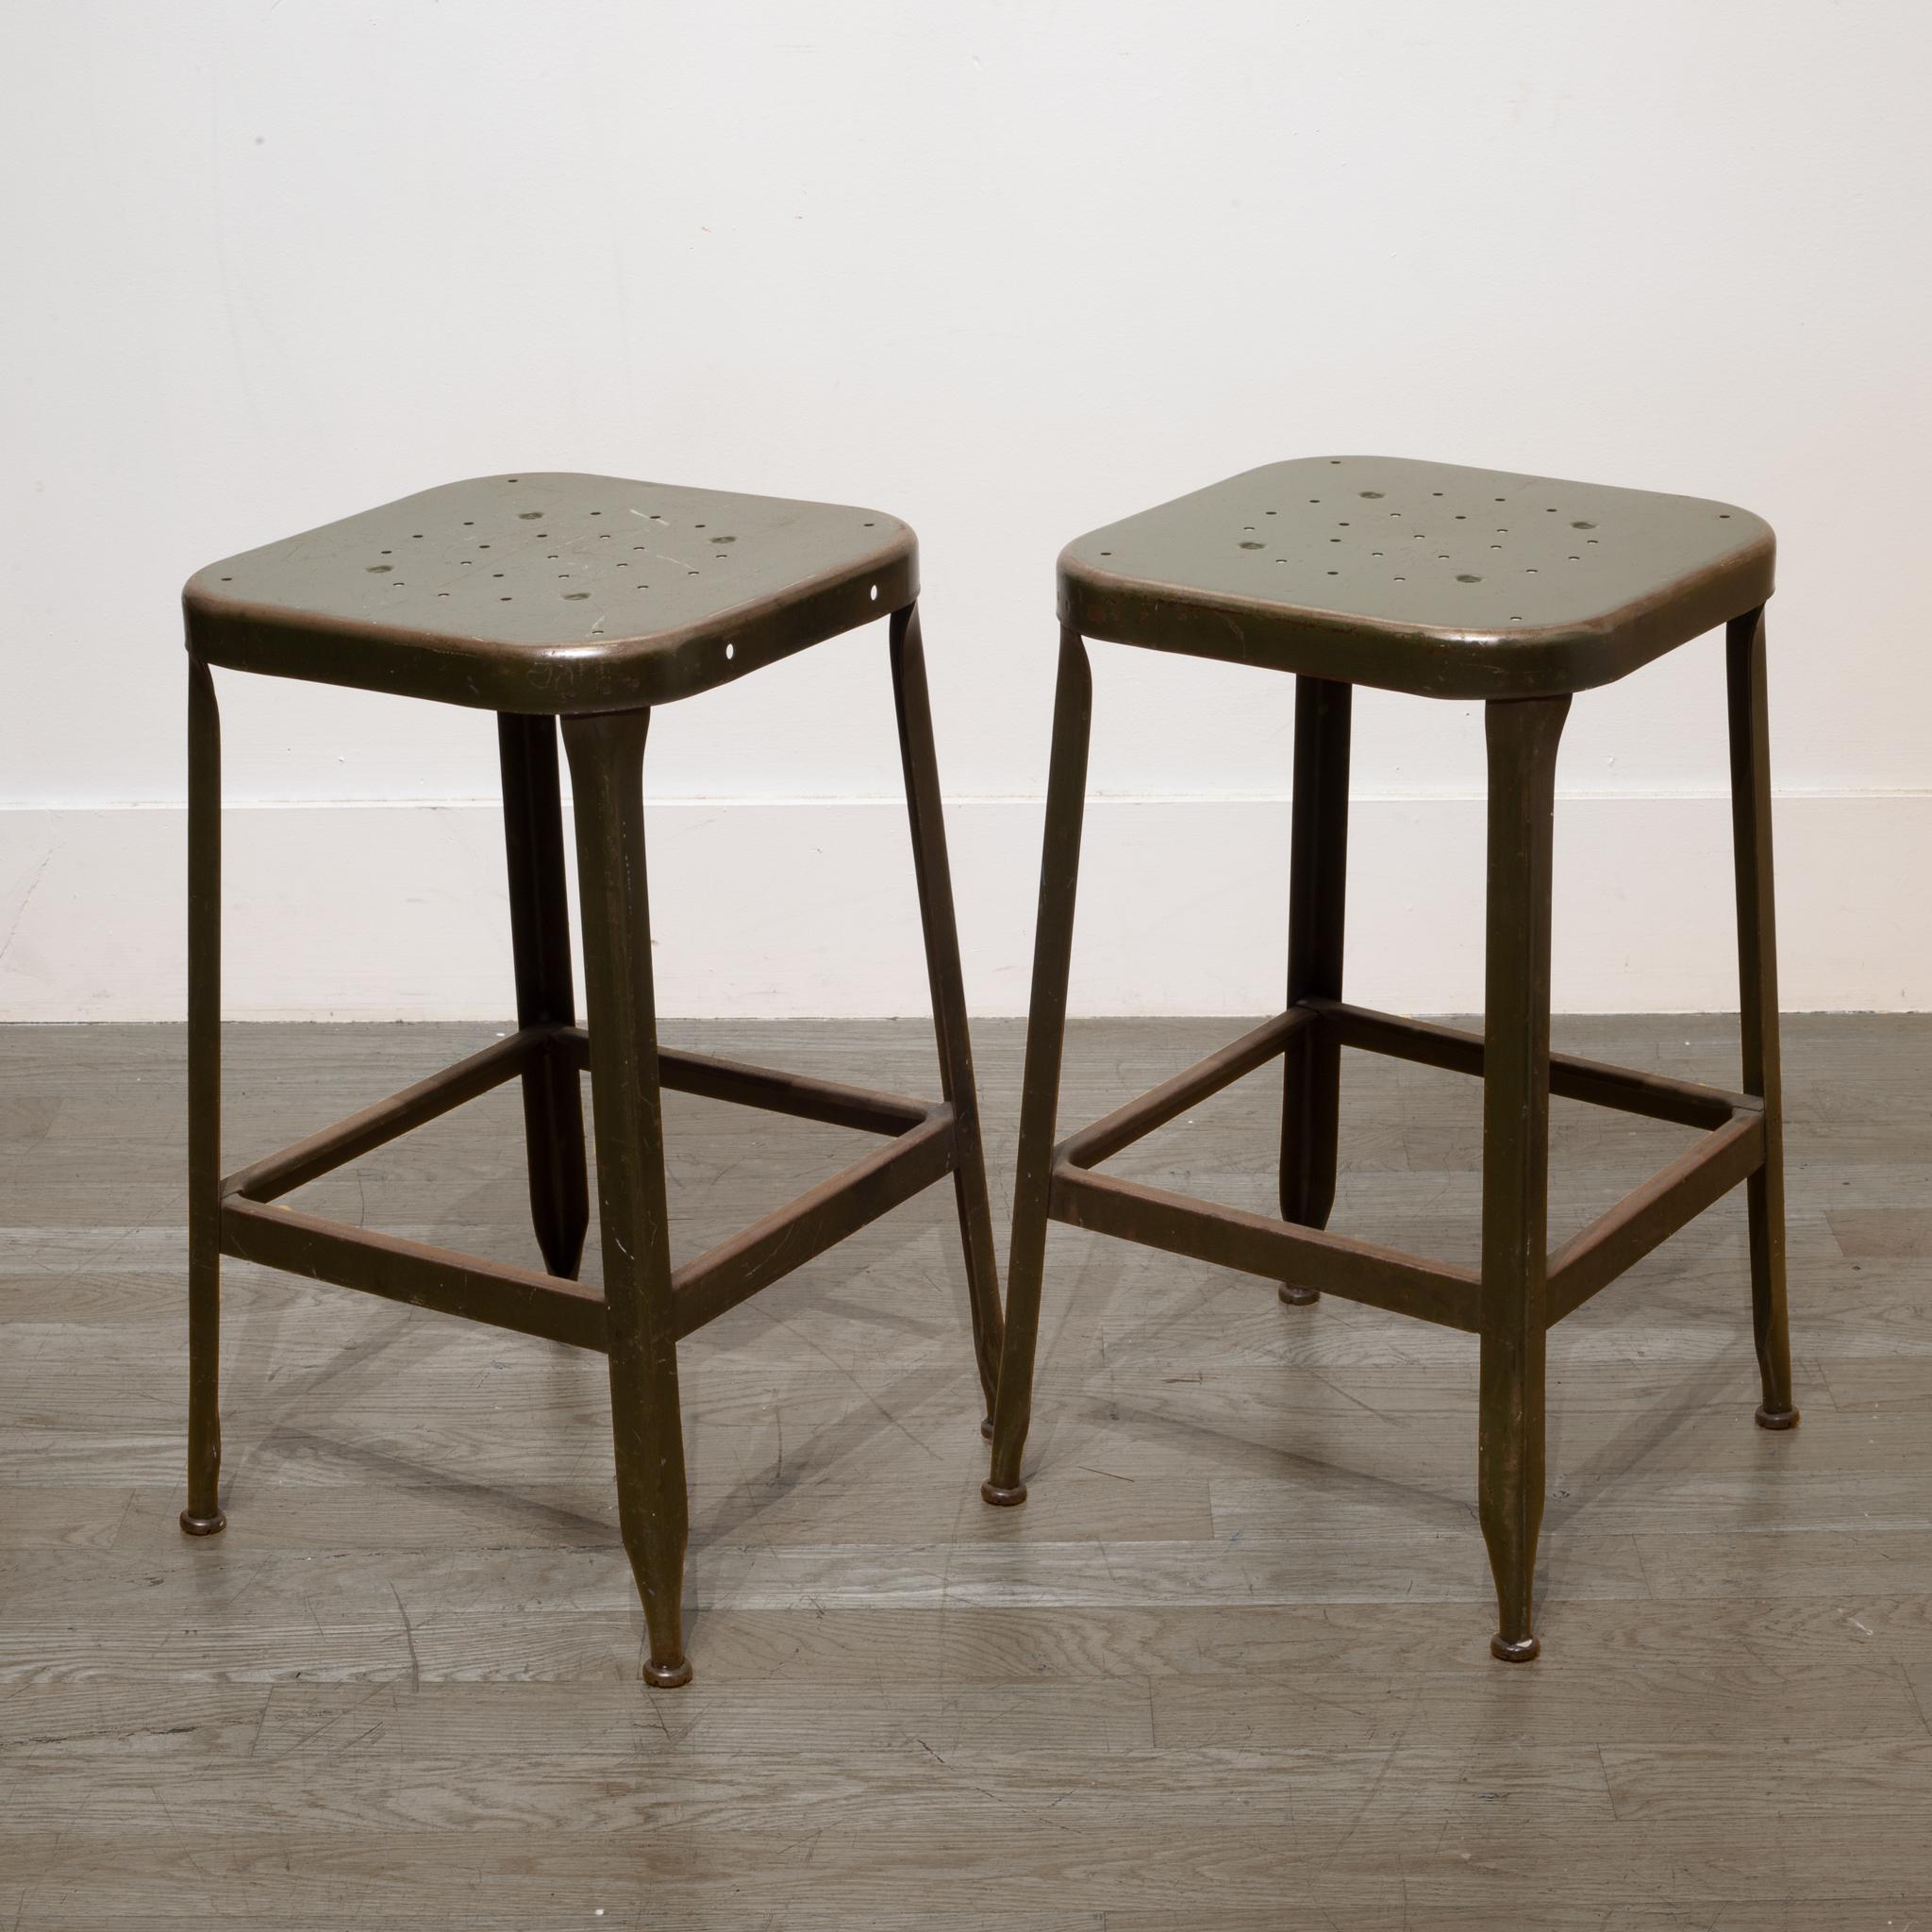 Industrial Pressed and Folded Steel Factory Stools, circa 1950